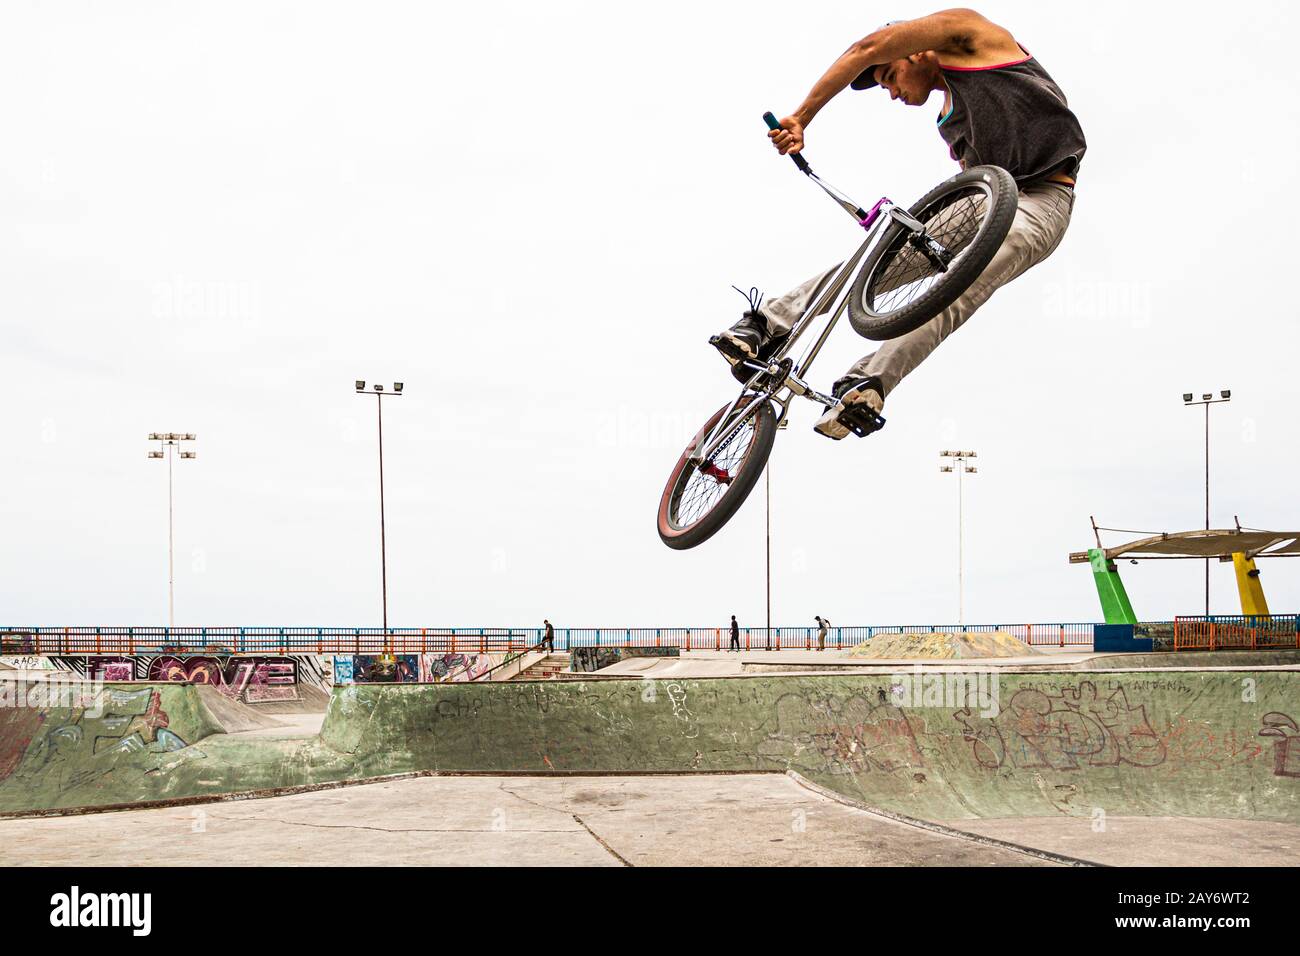 Young man jumping with a BMX bicycle at Skatepark, in Playa Brava. Iquique, Tarapaca Region, Chile. Stock Photo